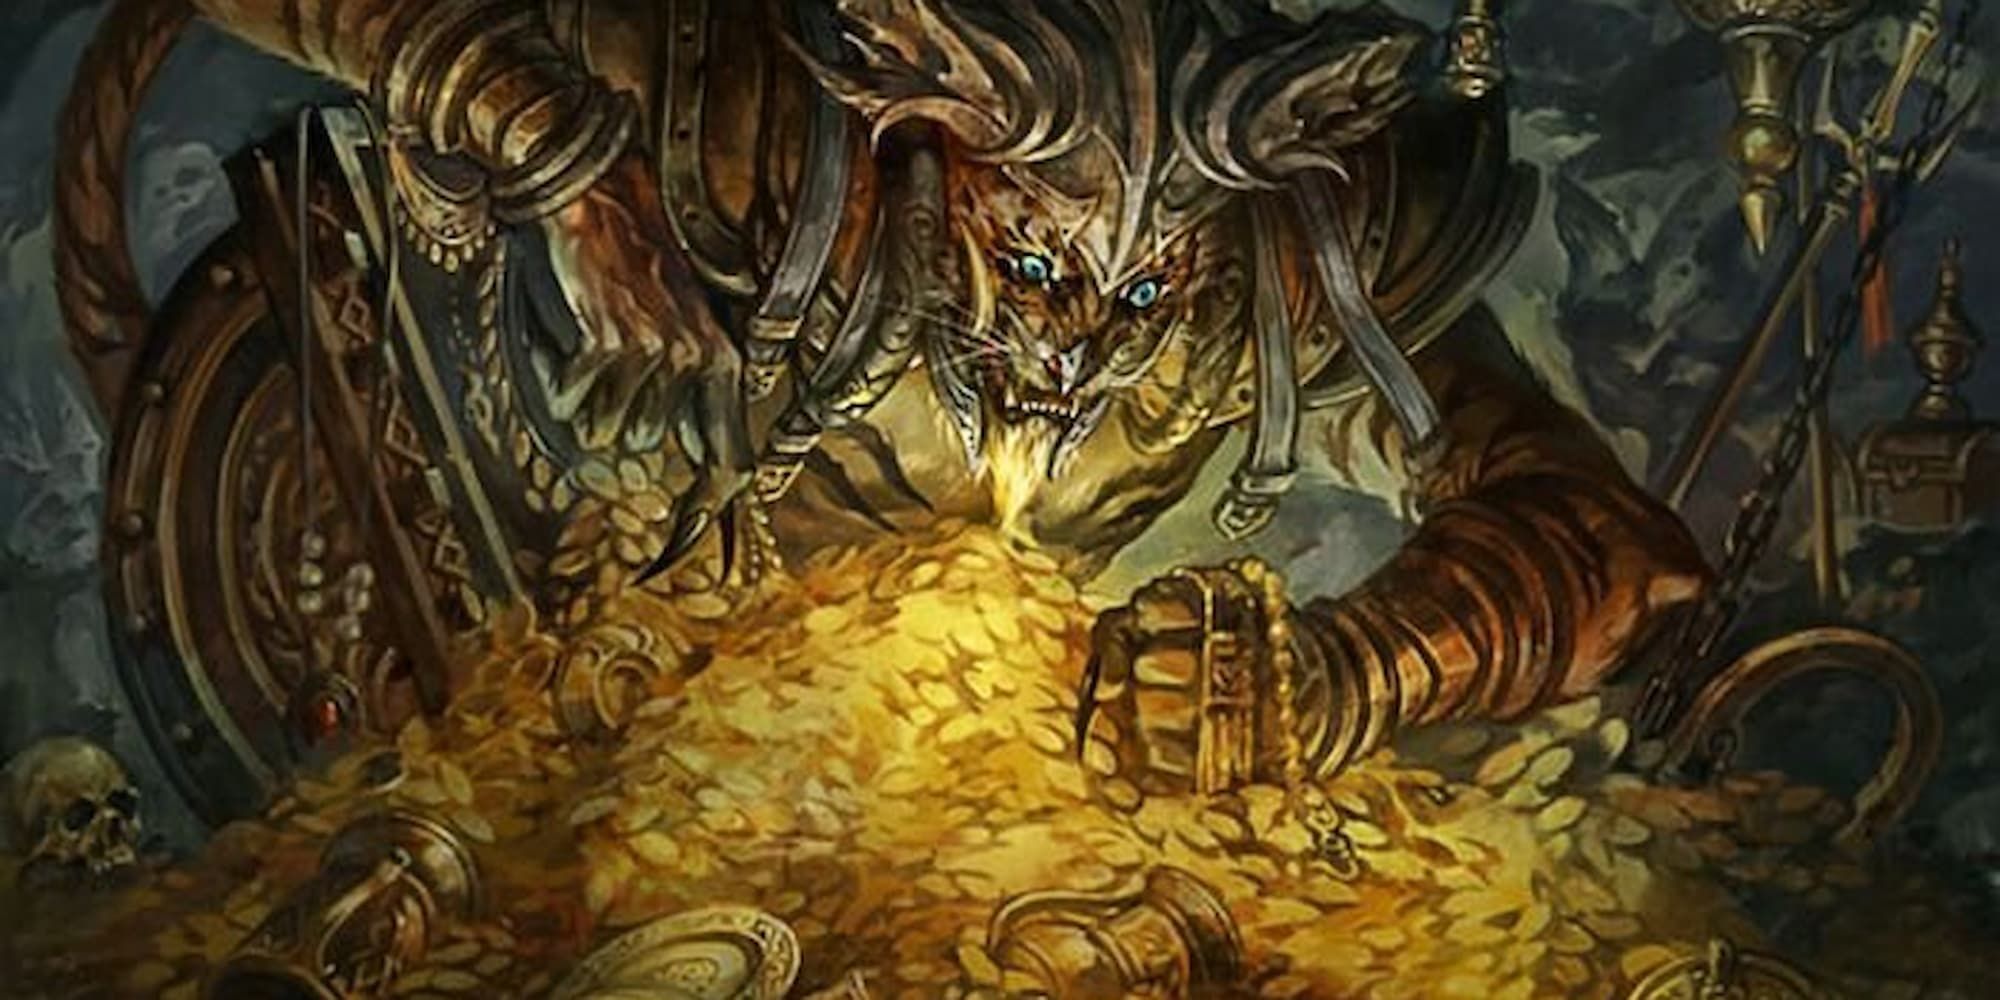 A tabaxi in armor looking over a mound of gold coins and other treasure